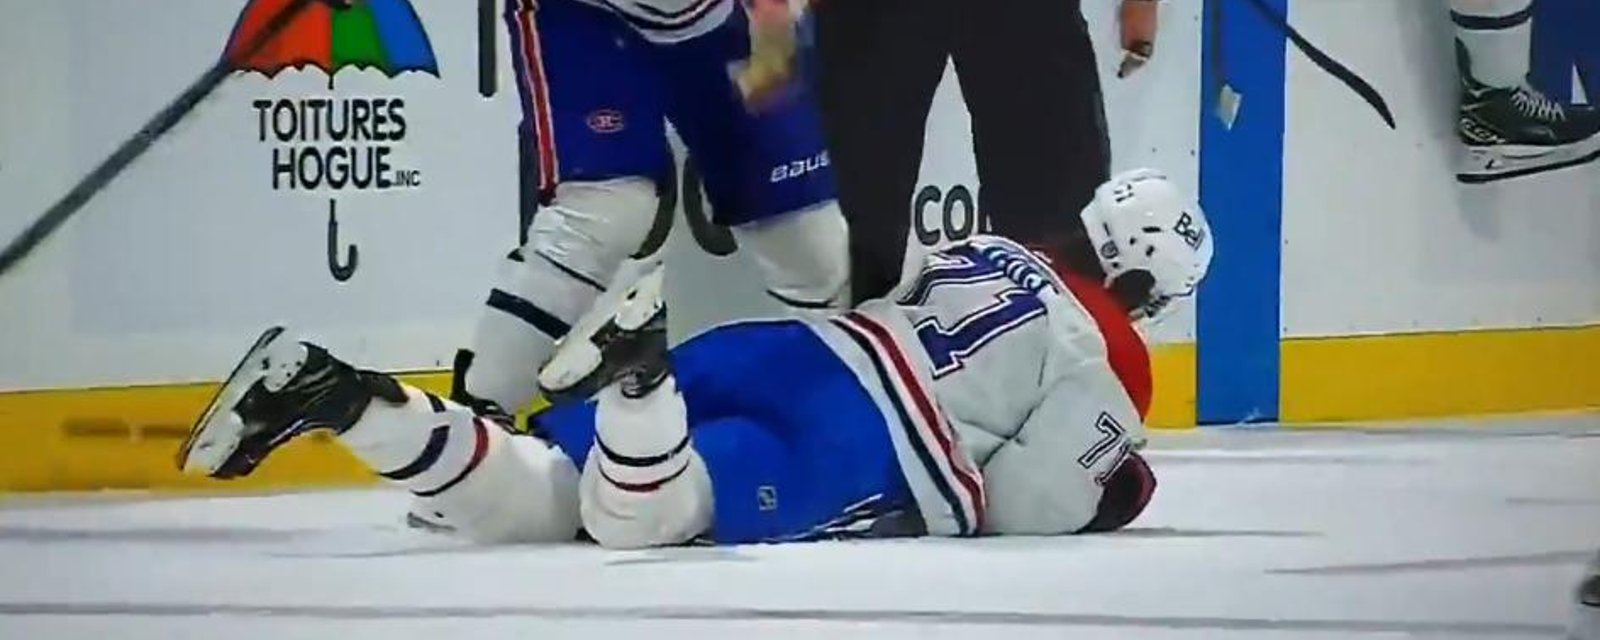 Jake Evans laid out after a high hit from Gudbranson.